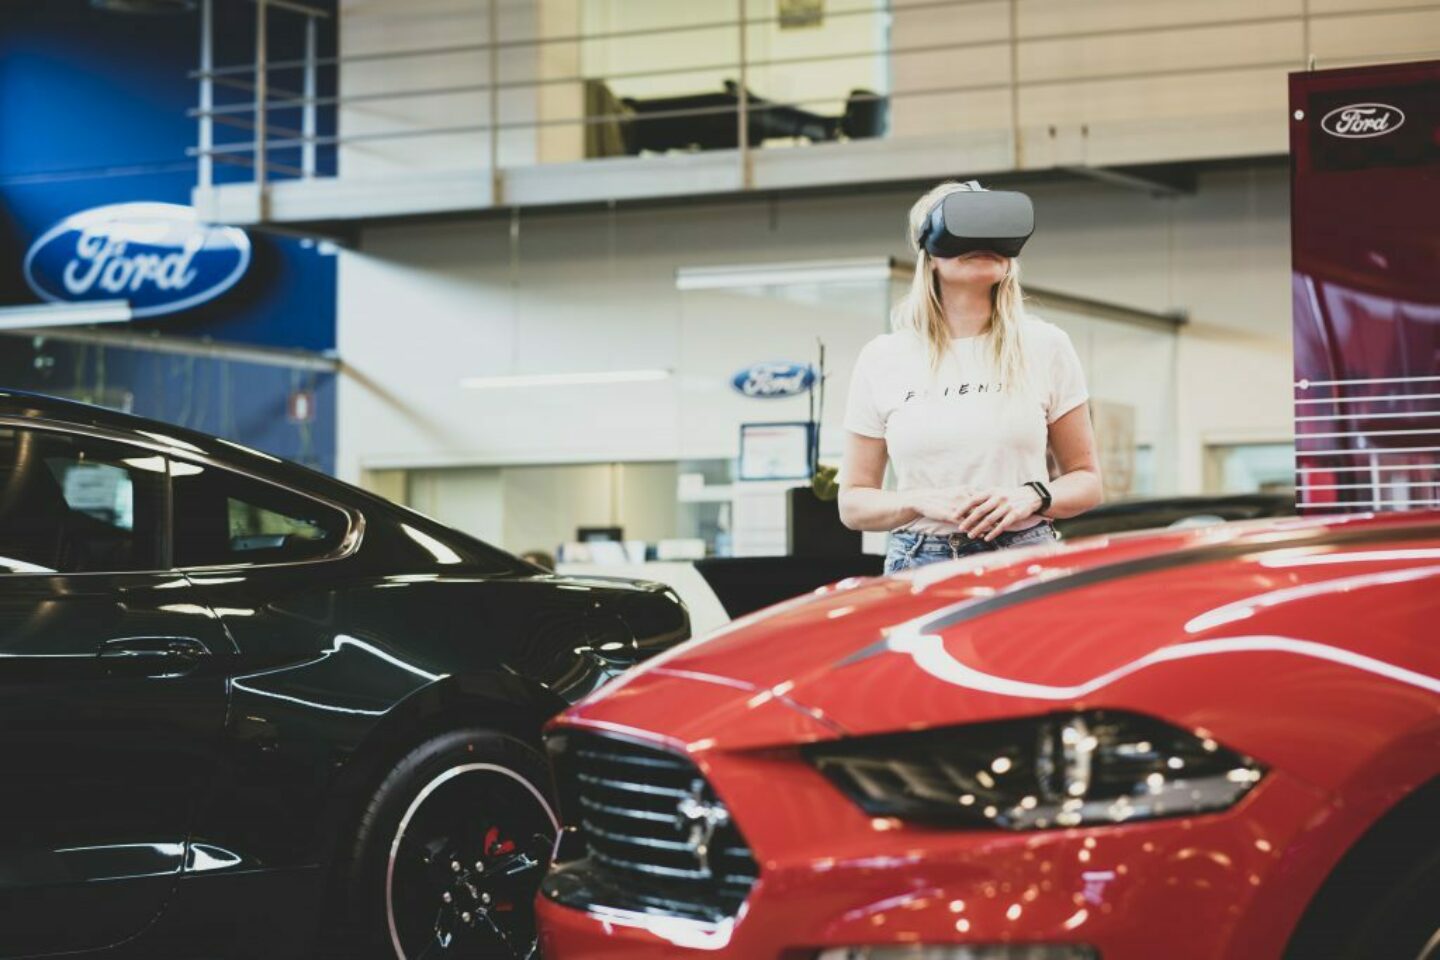 Gearing up: Ford Mustang of the future in virtual reality